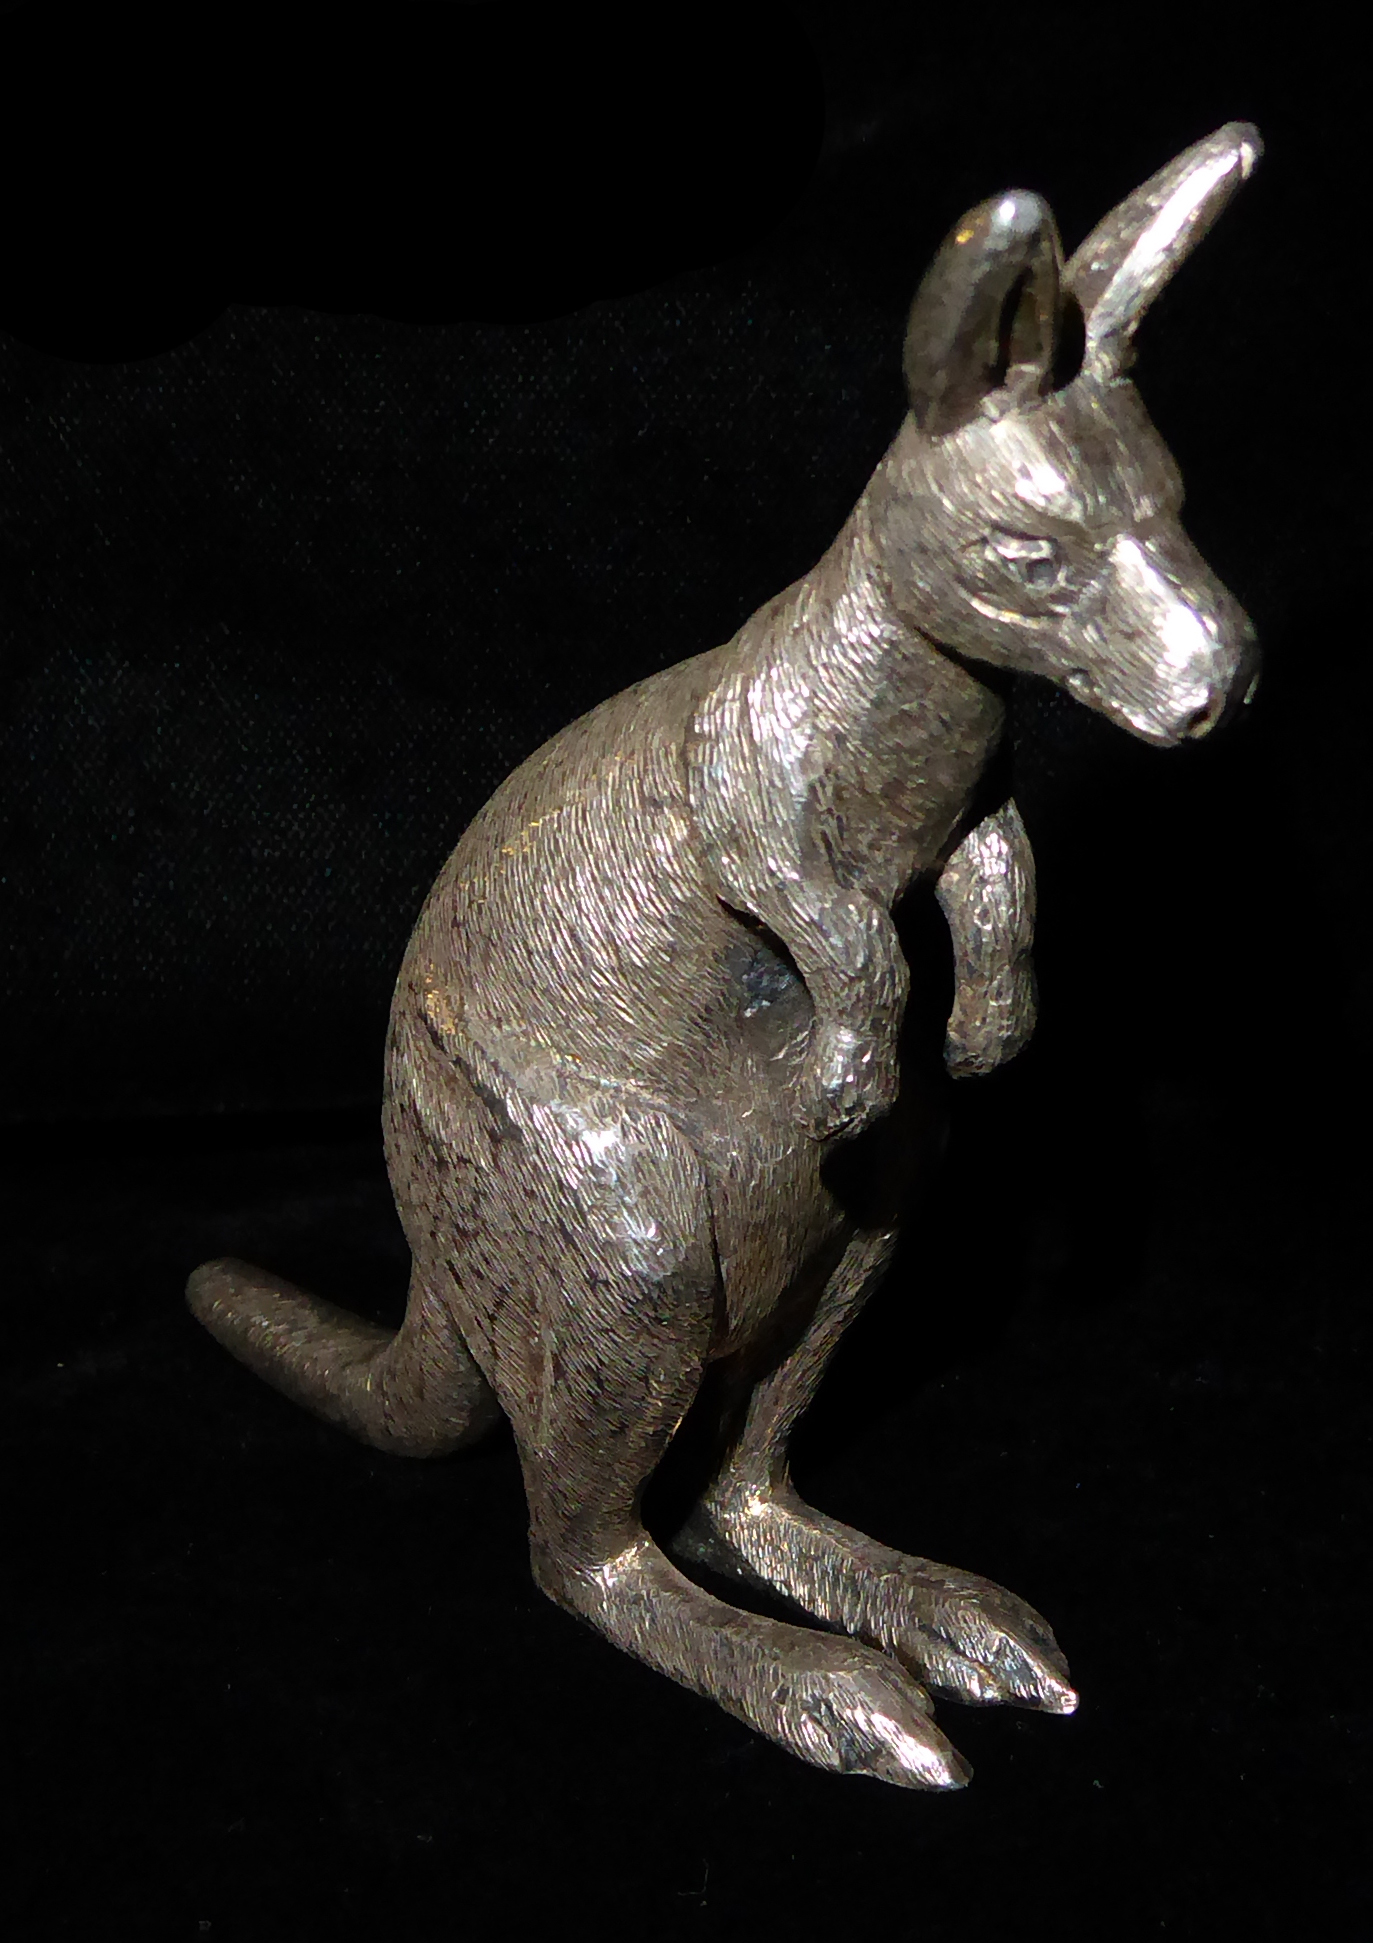 A LATE 19TH/EARLY 20TH CENTURY AUSTRALIAN SILVER KANGAROO FIGURE Standing pose with fine engraved - Image 3 of 6